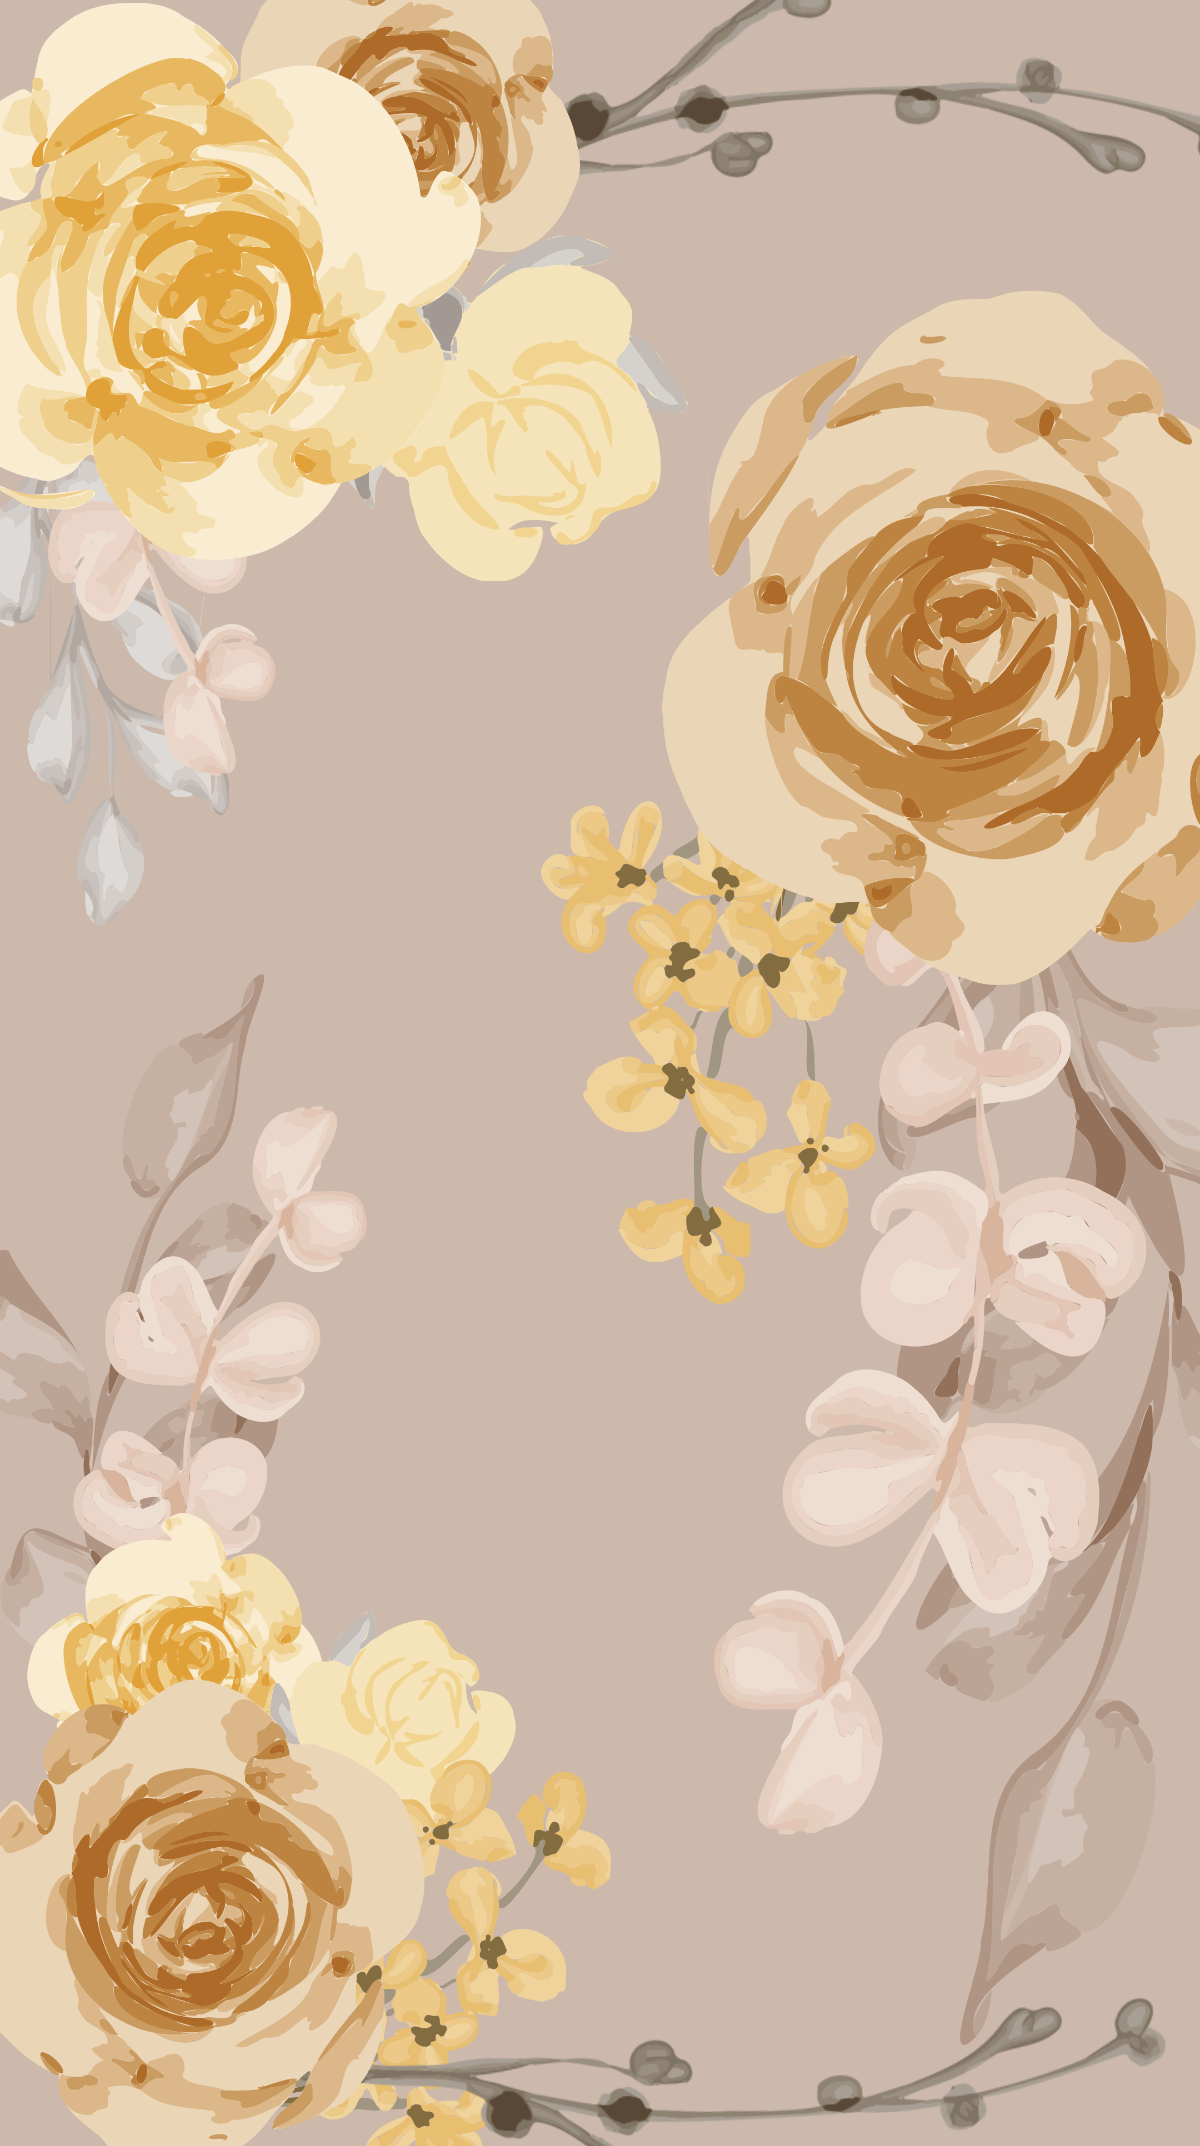 Free Vintage Floral Background For iPhone Template